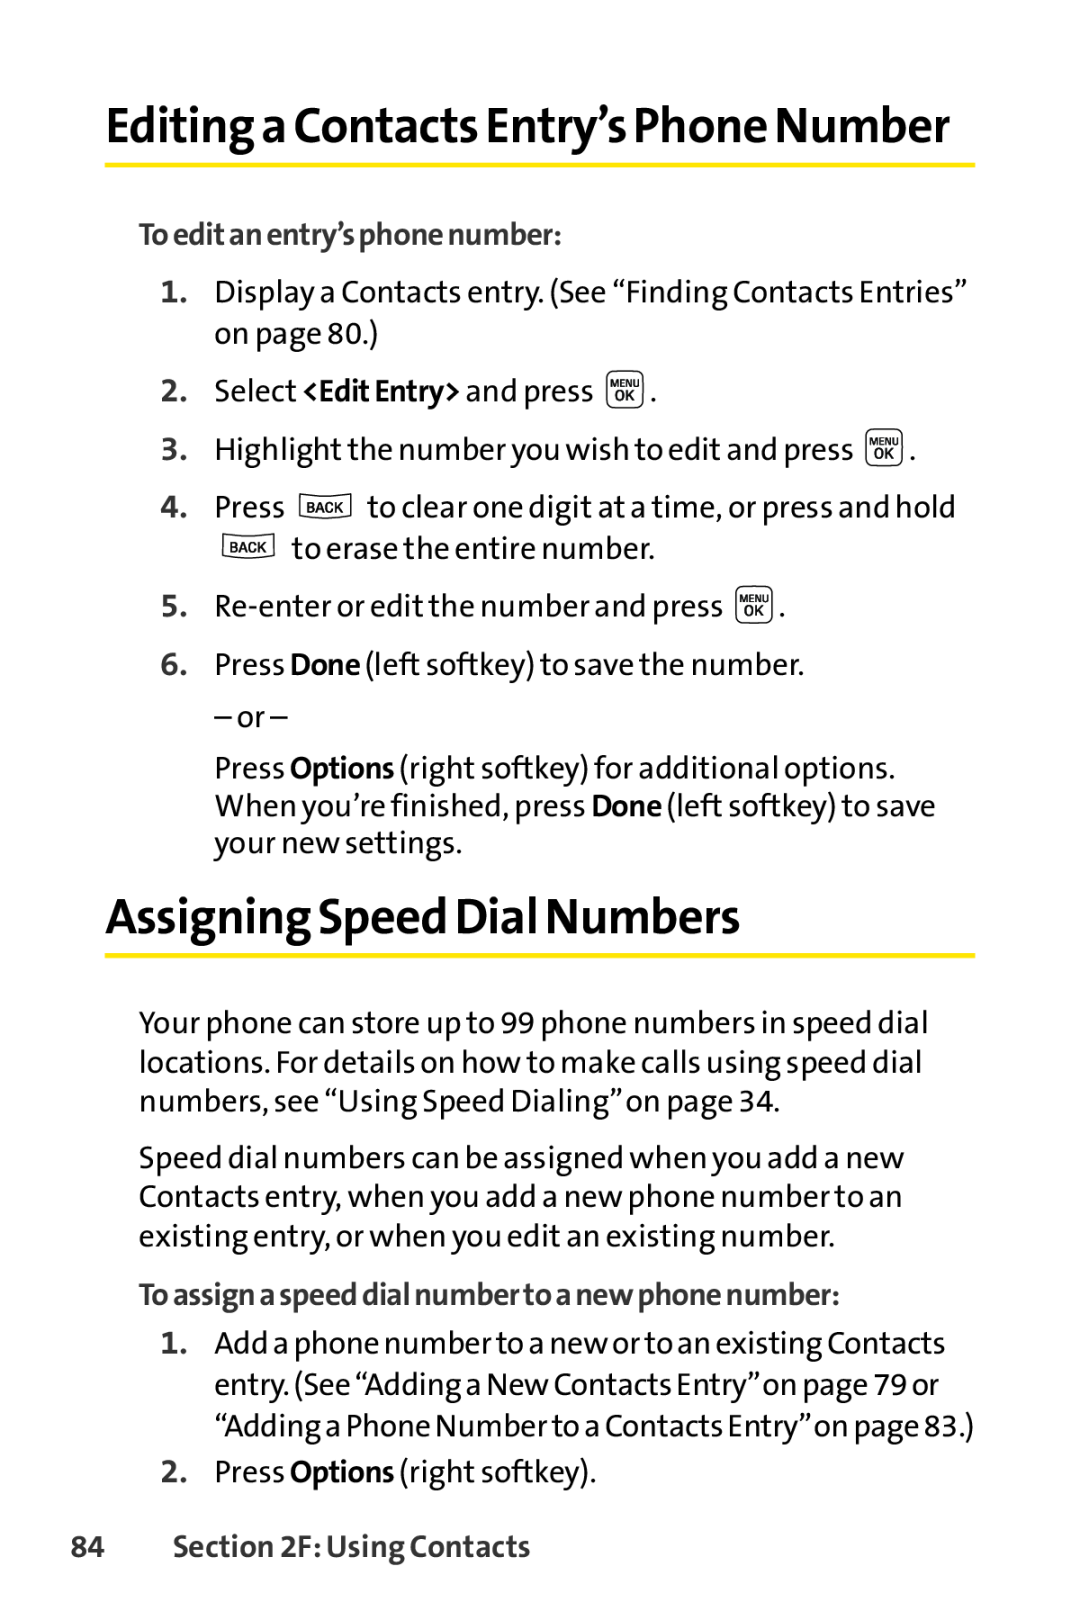 Sprint Nextel LX160 Assigning Speed Dial Numbers, Editing a Contacts Entry’s Phone Number, Toeditanentry’sphonenumber 